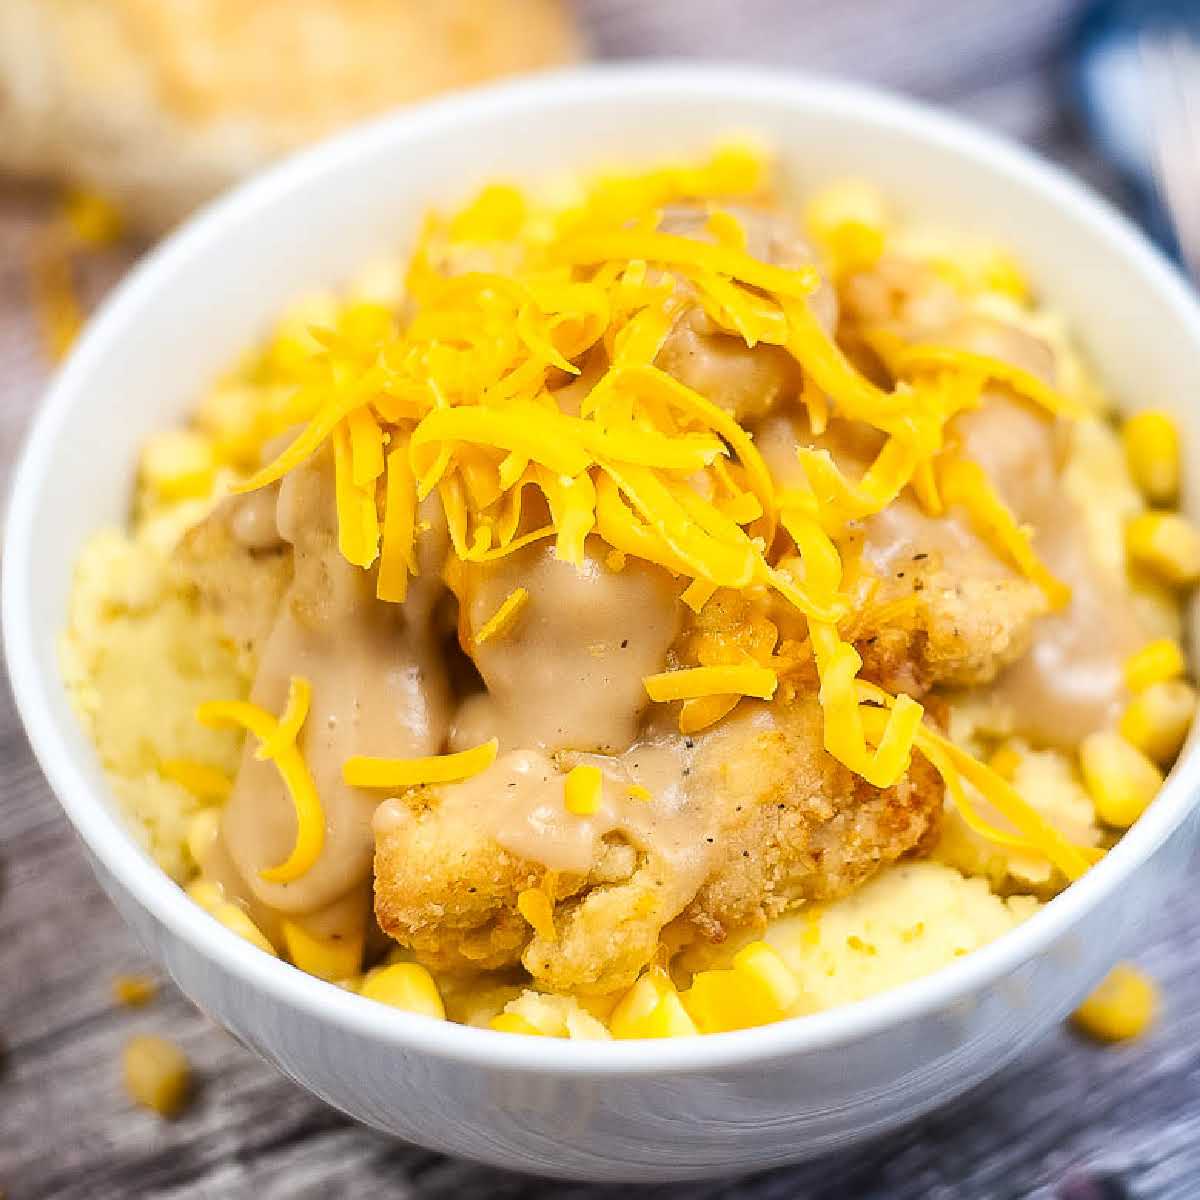 How to make Copycat KFC Famous Bowl in the Air Fryer - Just An